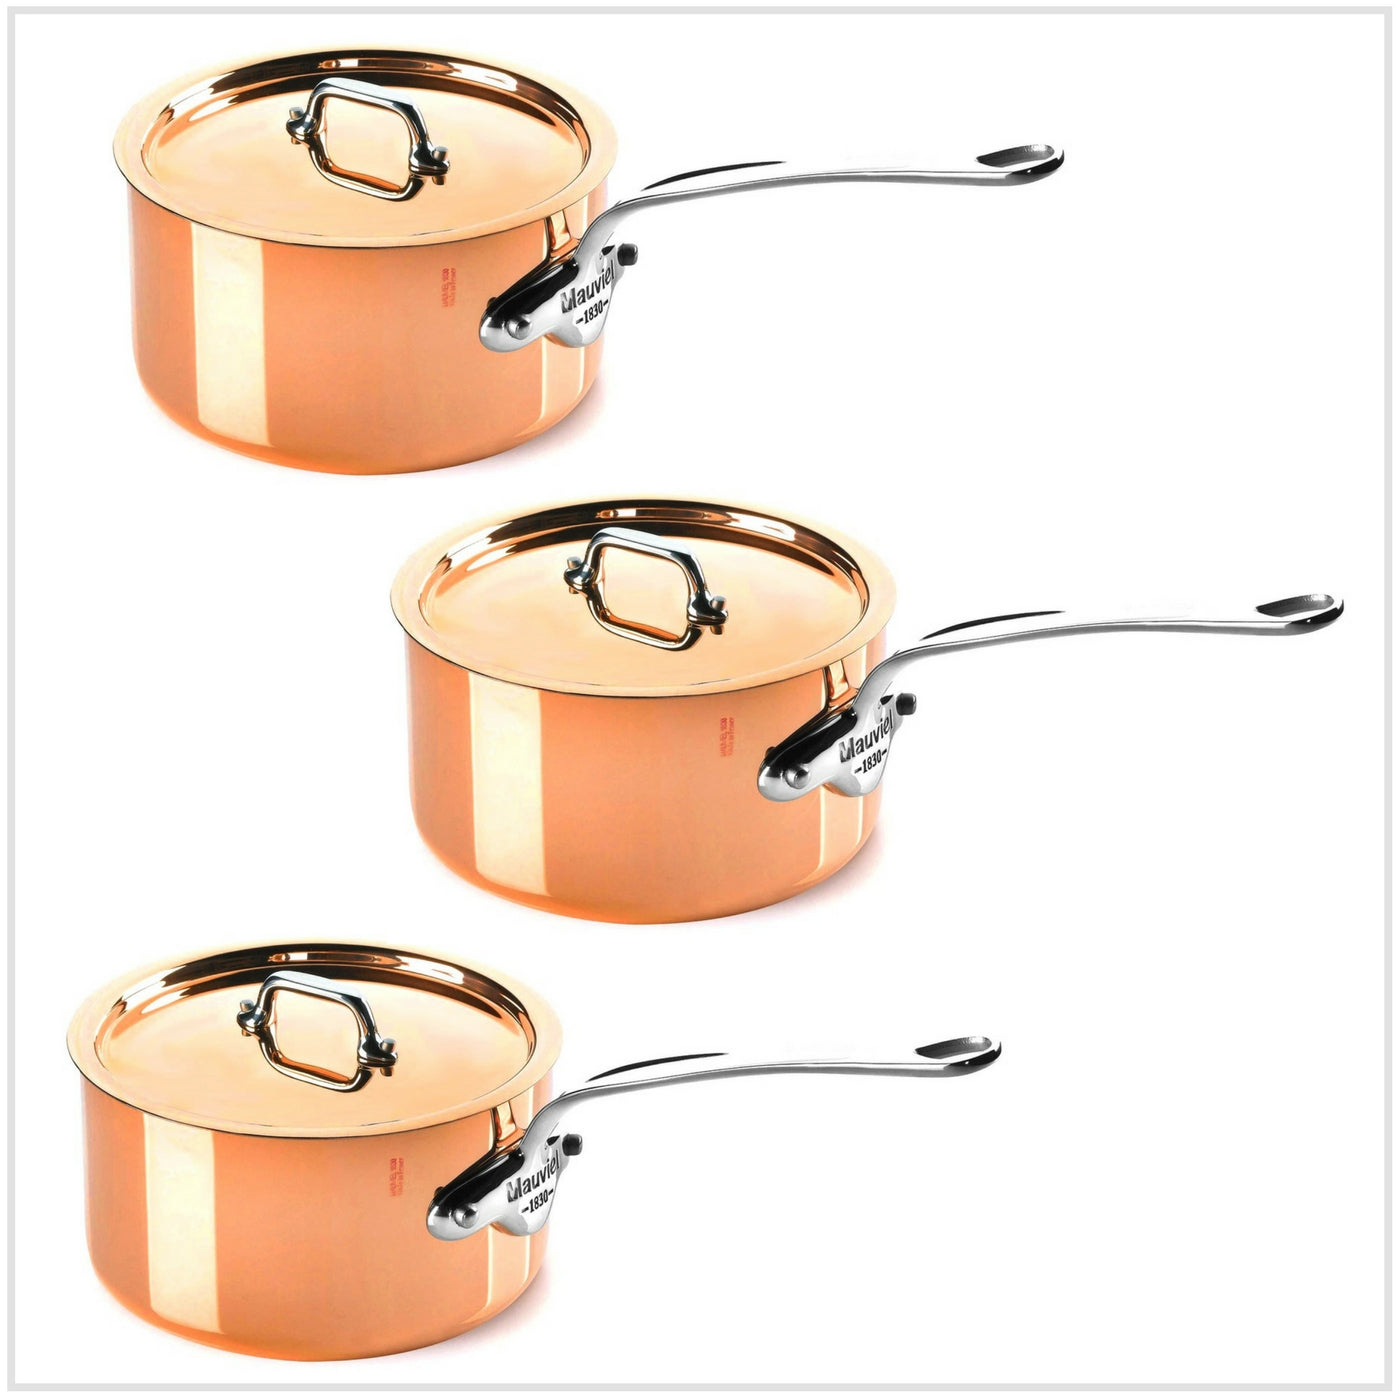 Mauviel M'150S Copper Saucepan Set 16,18, 20cm with Lids (Stainless Steel Handles)